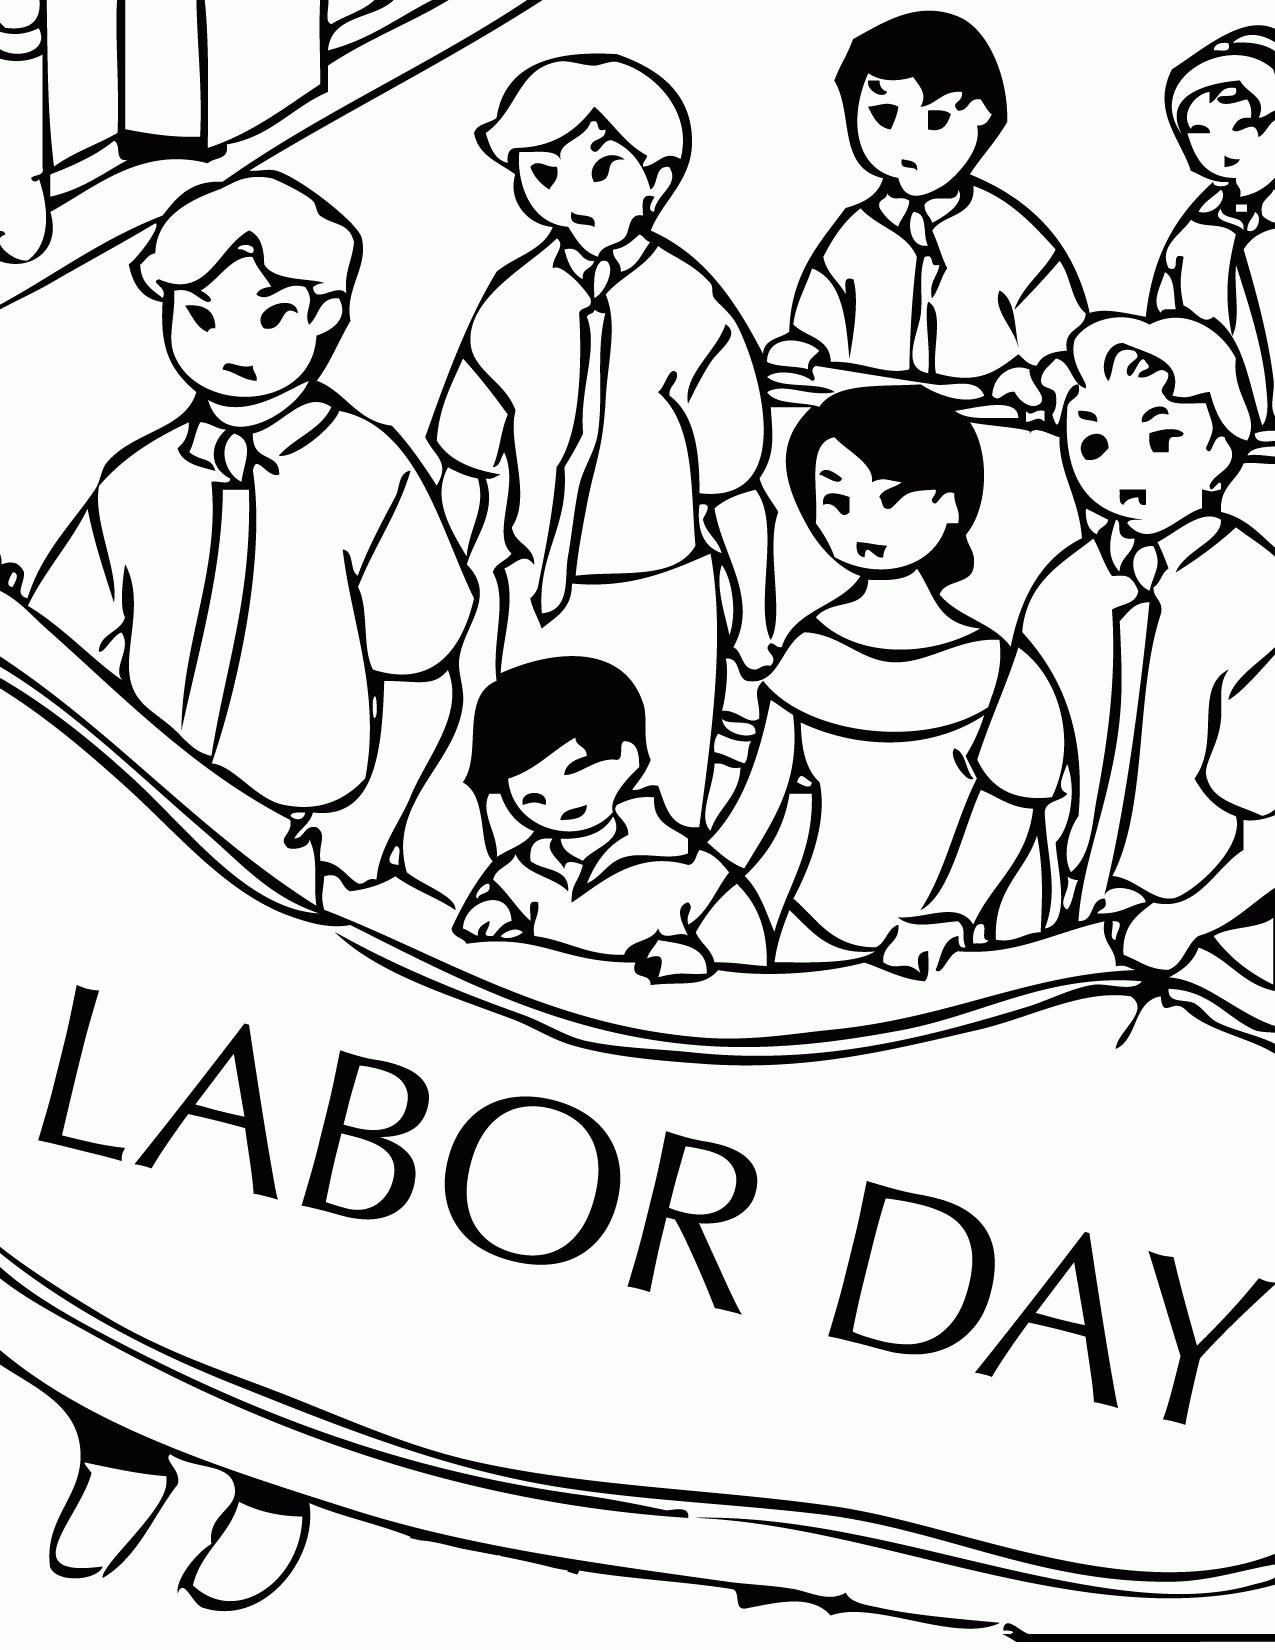 Labor Day Adult Coloring Pages Coloring Pages